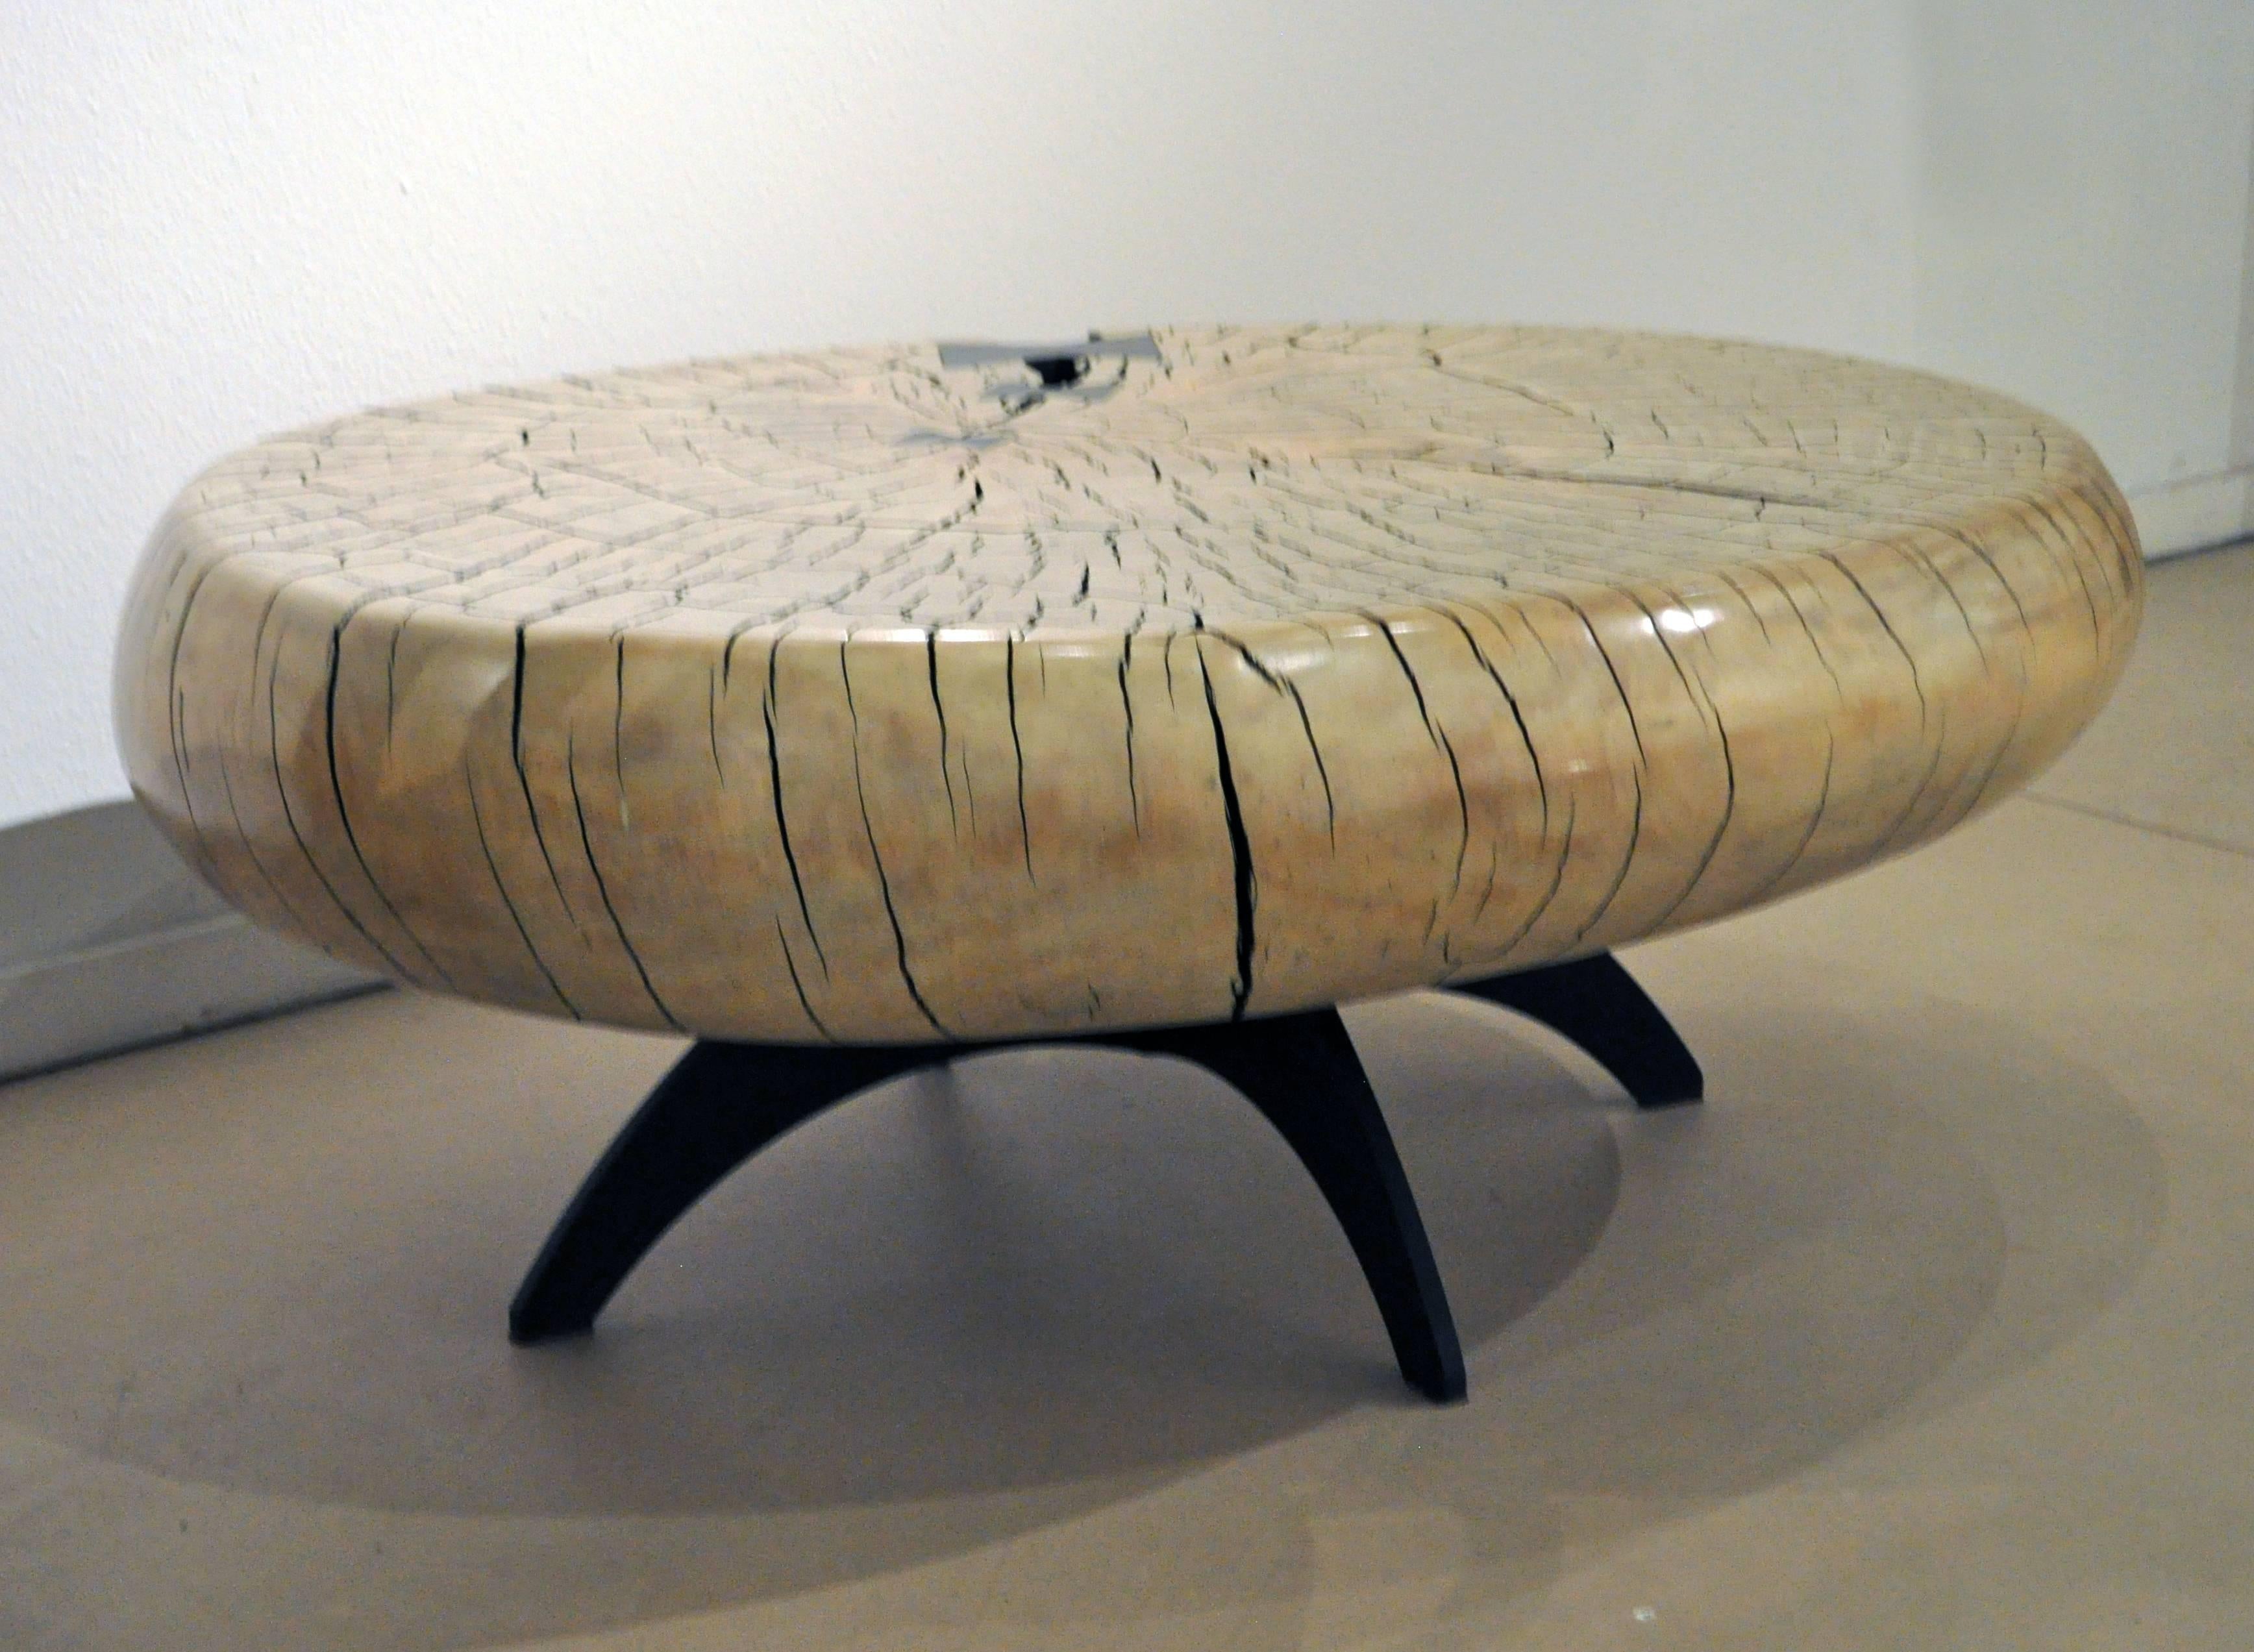 Artist Daniel Pollock, is well-known for his one of a kind sculptural tables and seats that he creates out of solid sections of tree trunks that he has salvaged from the San Bernardino National Forest. As an environmentally conscious artist, he